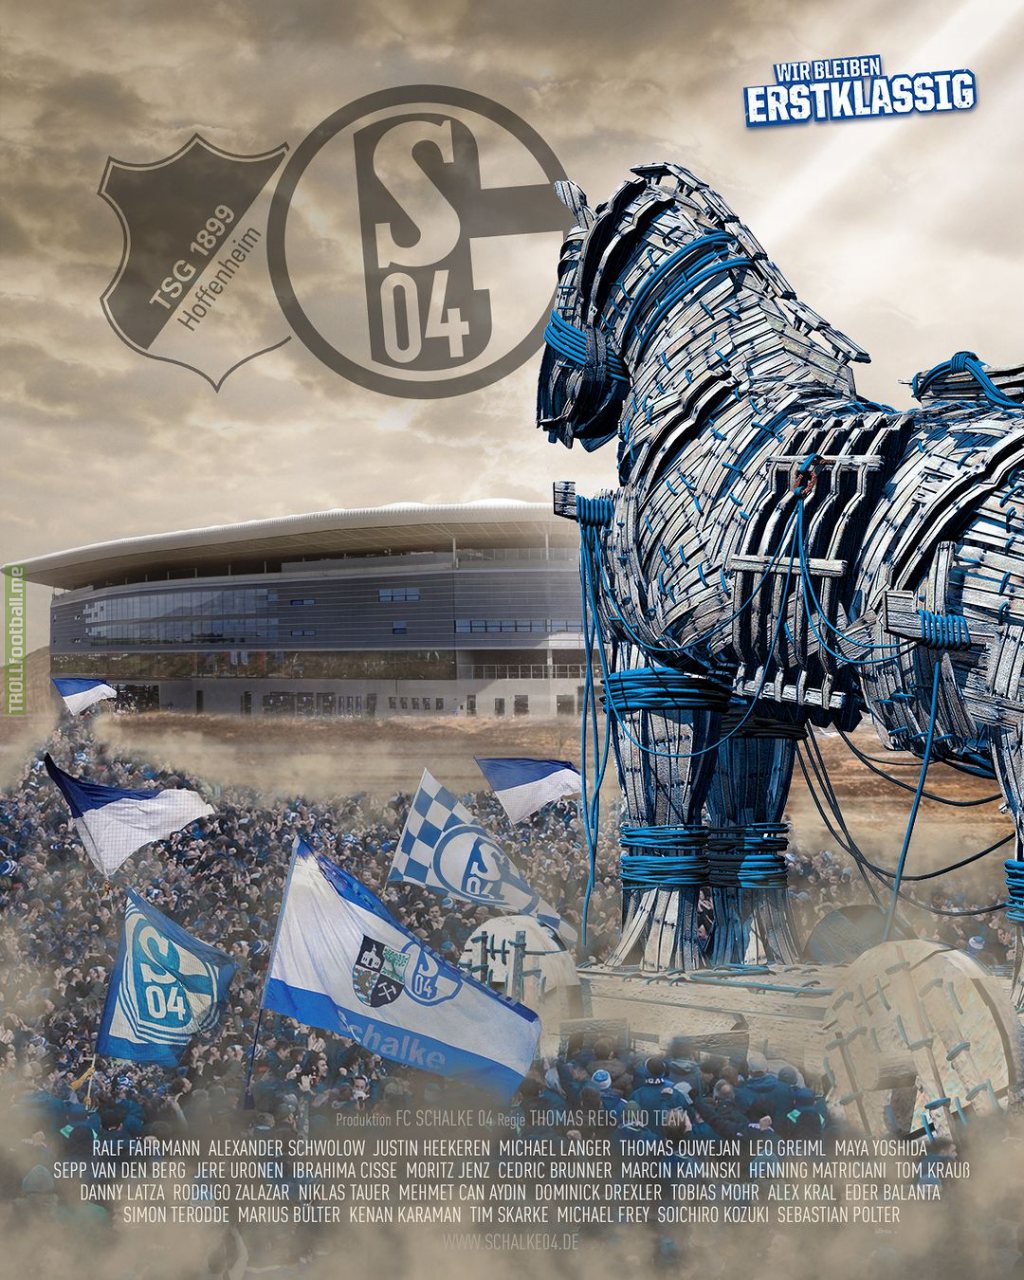 FC Schalke 04's matchday poster for tonights game in Hoffenheim (context in comments)